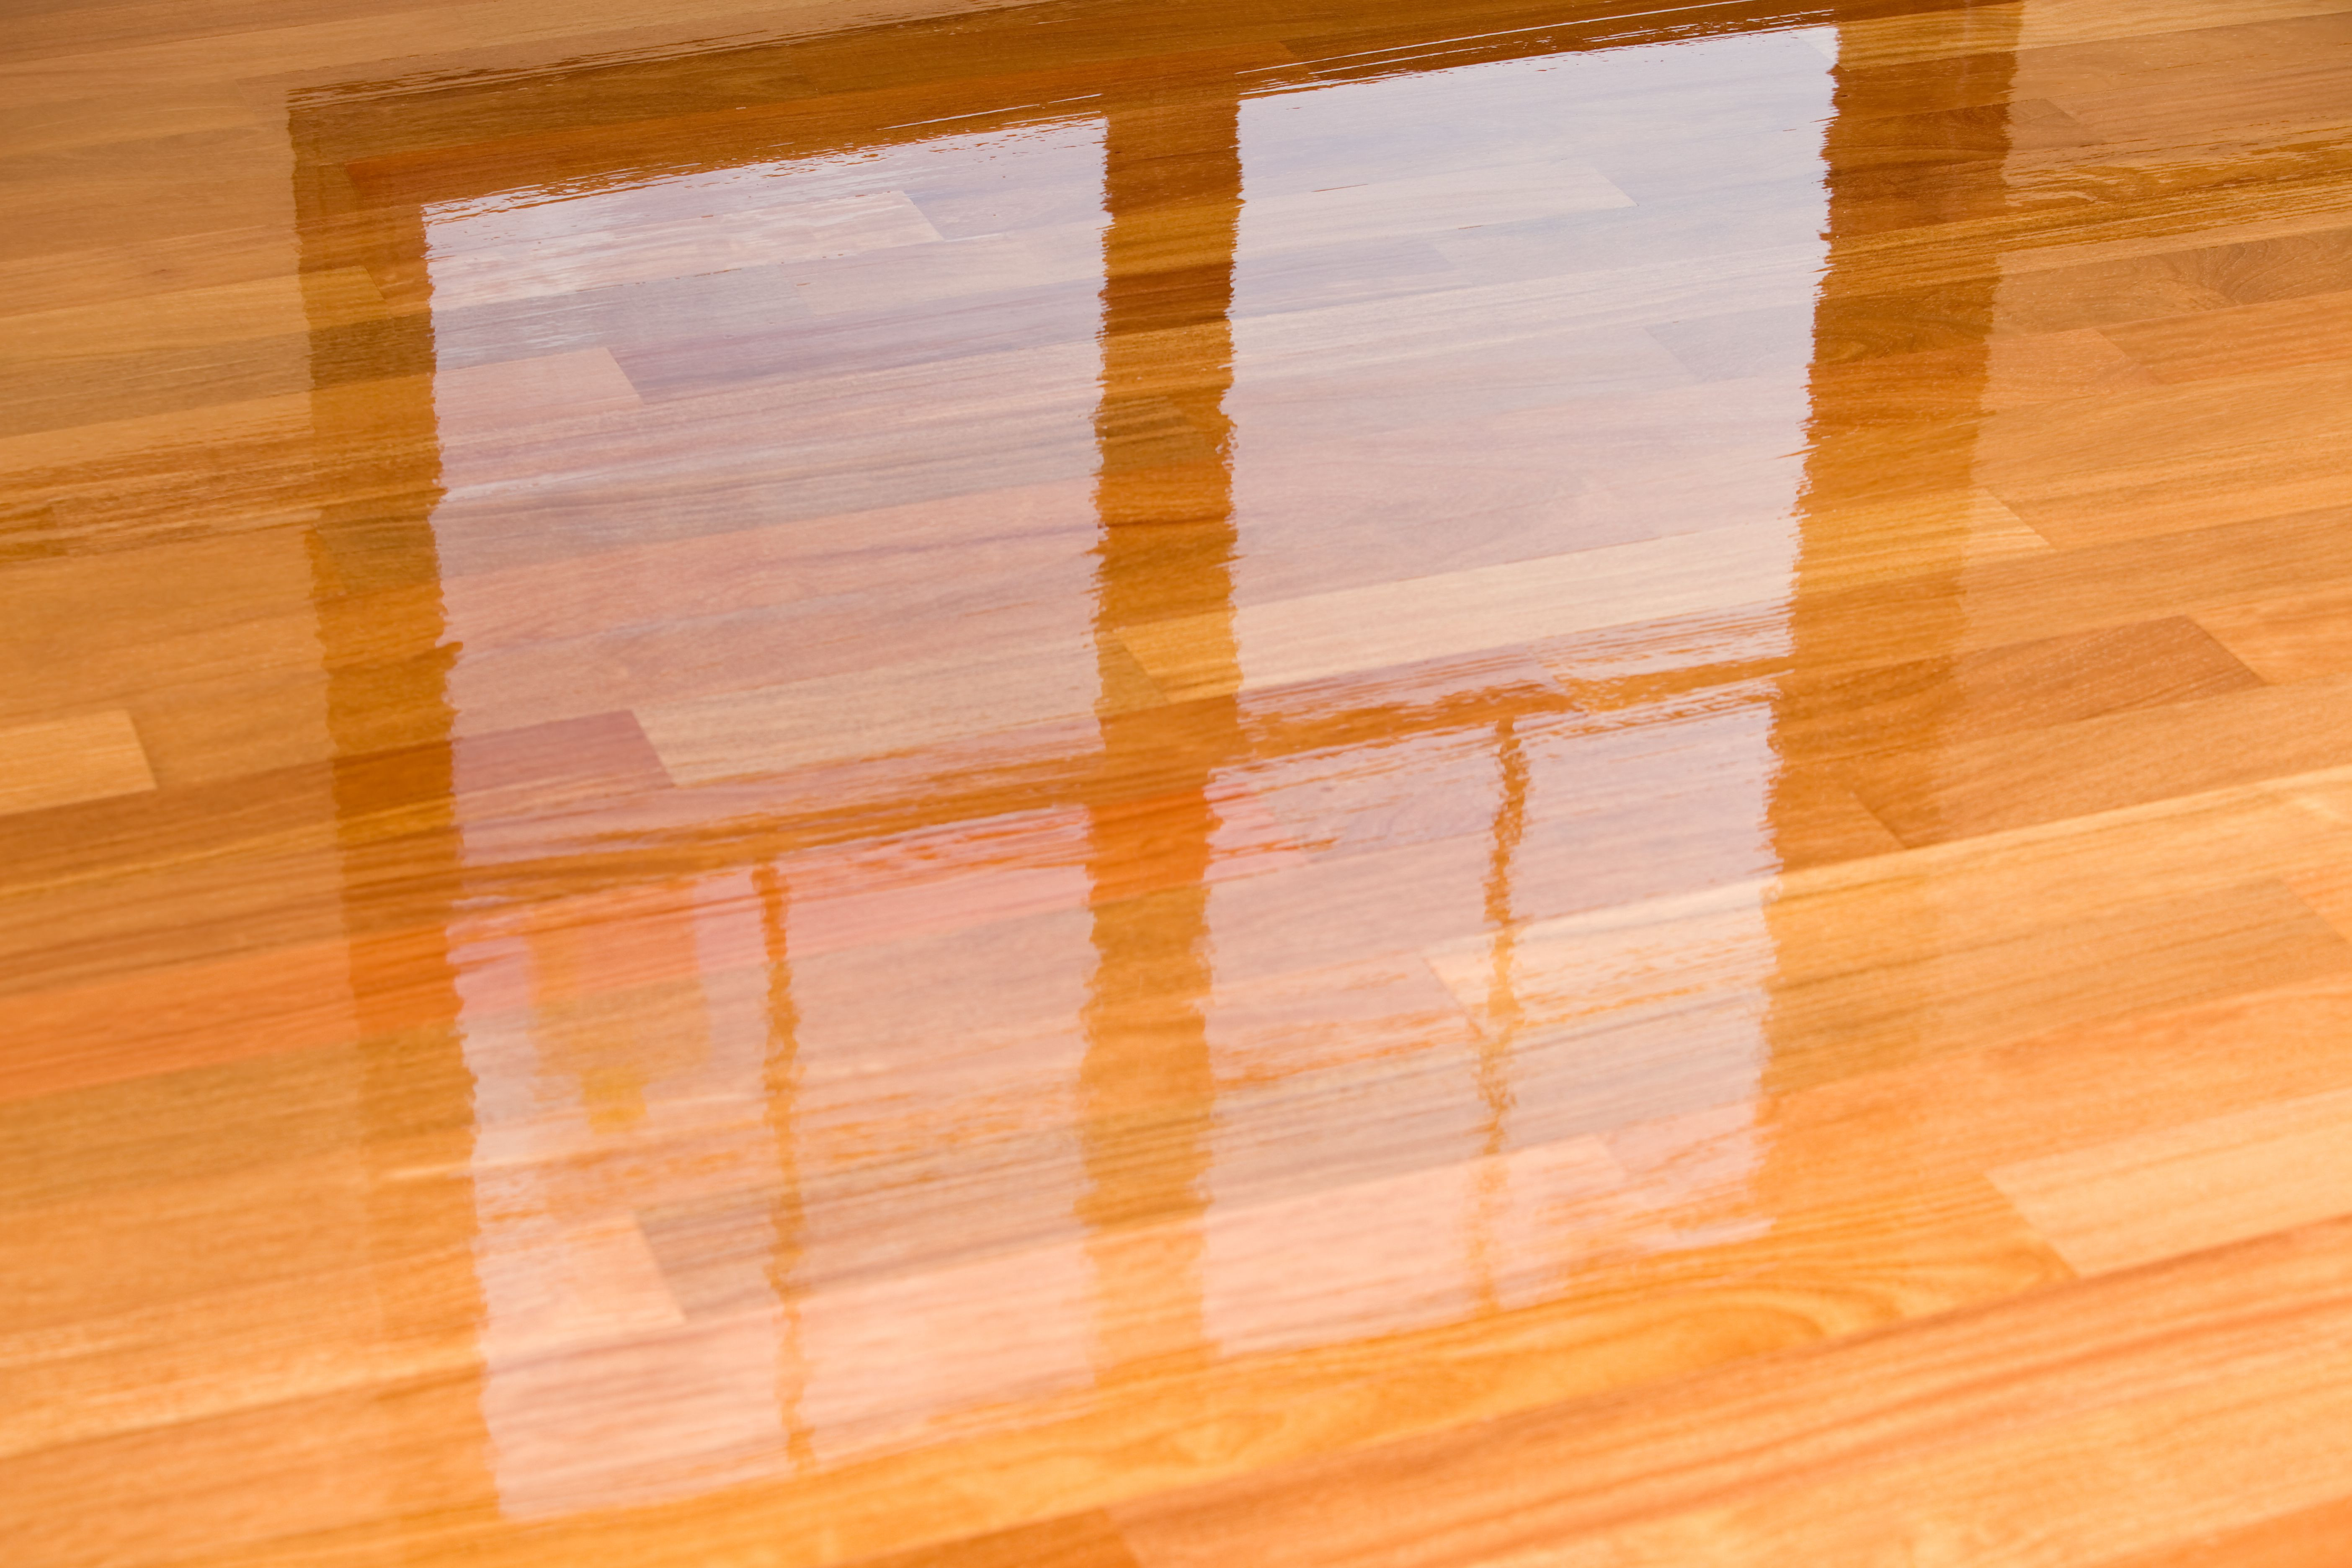 17 Unique Hardwood Floor Problems Cupping 2024 free download hardwood floor problems cupping of guide to laminate flooring water and damage repair within wet polyurethane on new hardwood floor with window reflection 183846705 582e34da3df78c6f6a403968